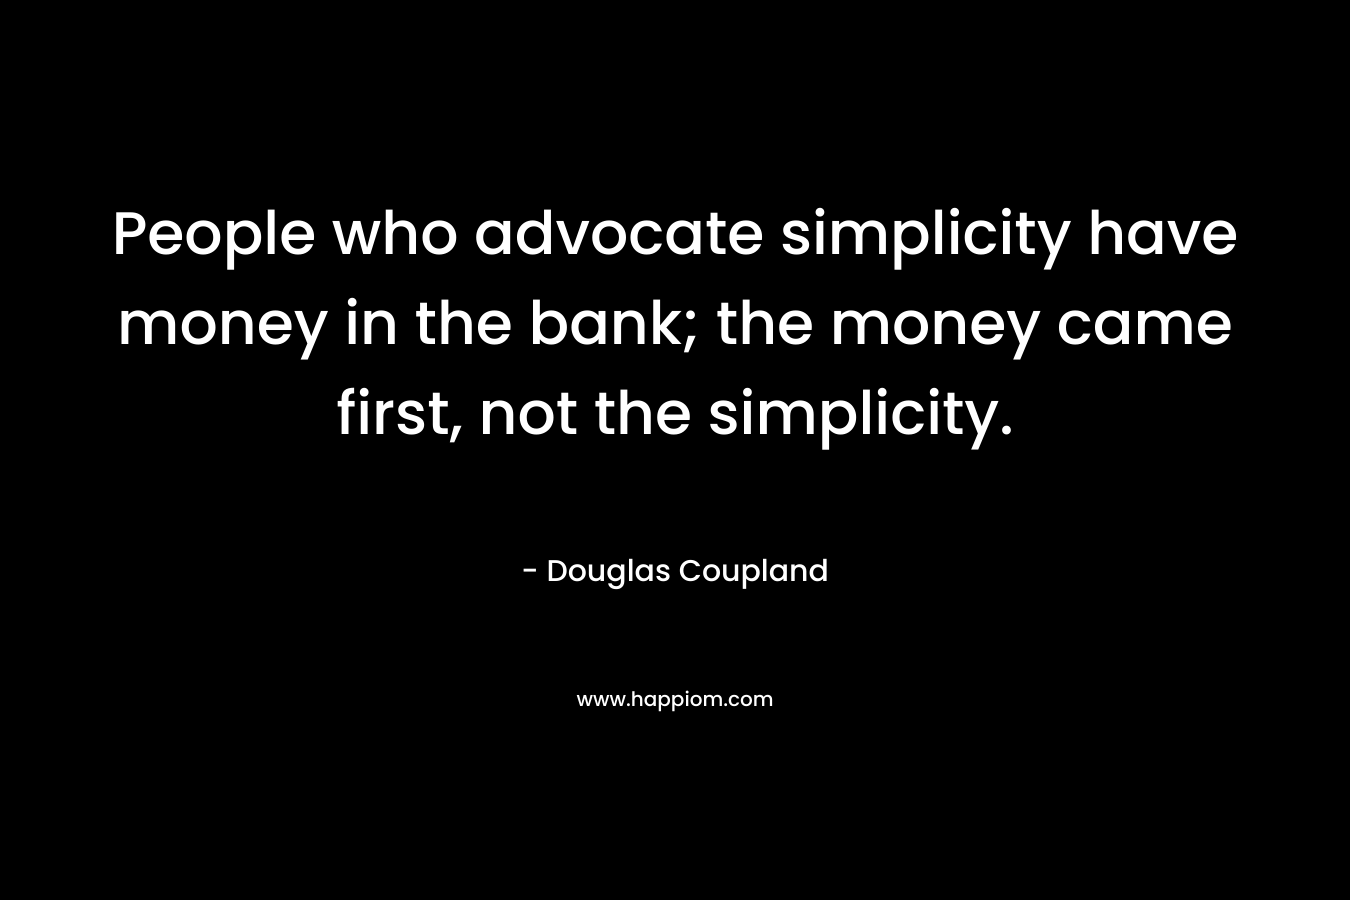 People who advocate simplicity have money in the bank; the money came first, not the simplicity.